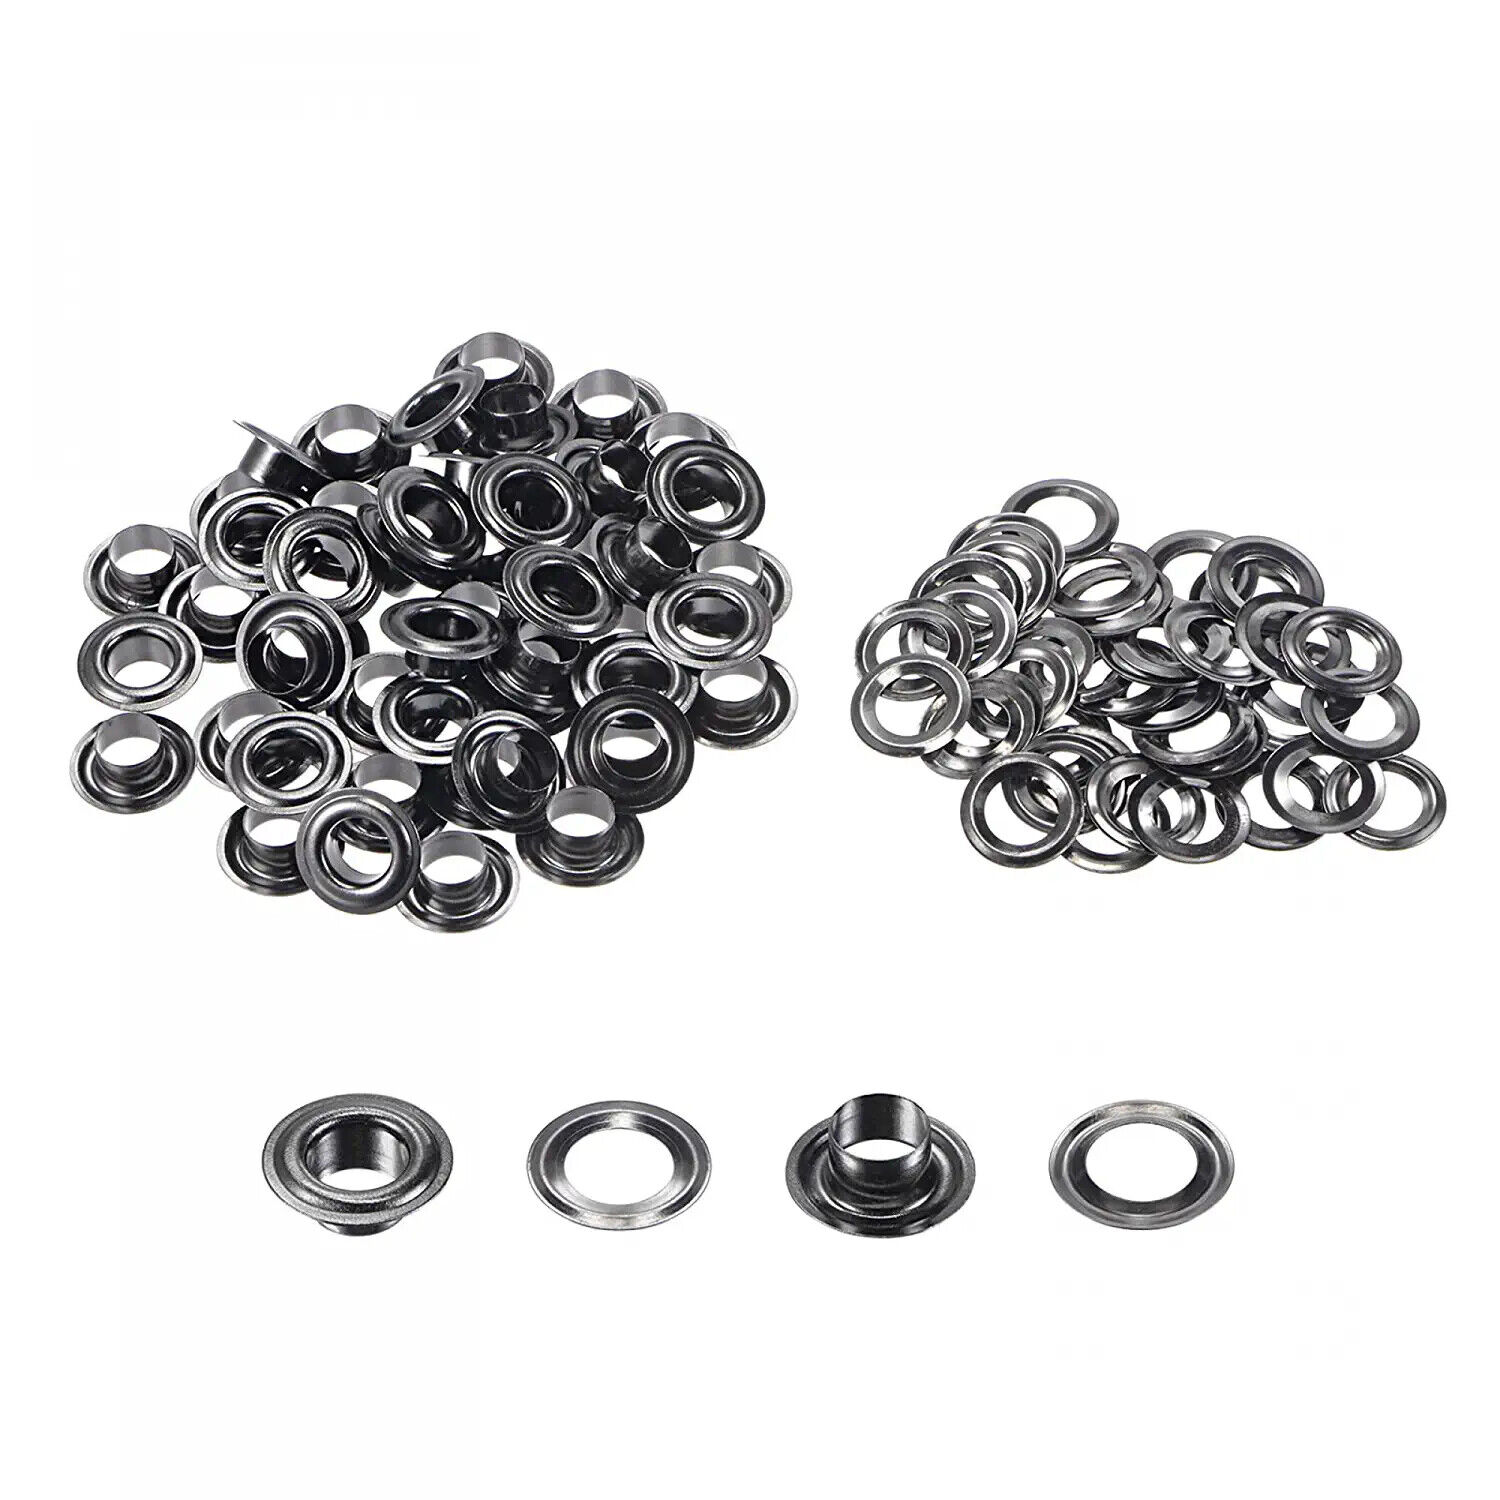 50set 7.5mm Hole Copper Grommets Eyelets Dim Grey For Fabric Leather Canvas Cu